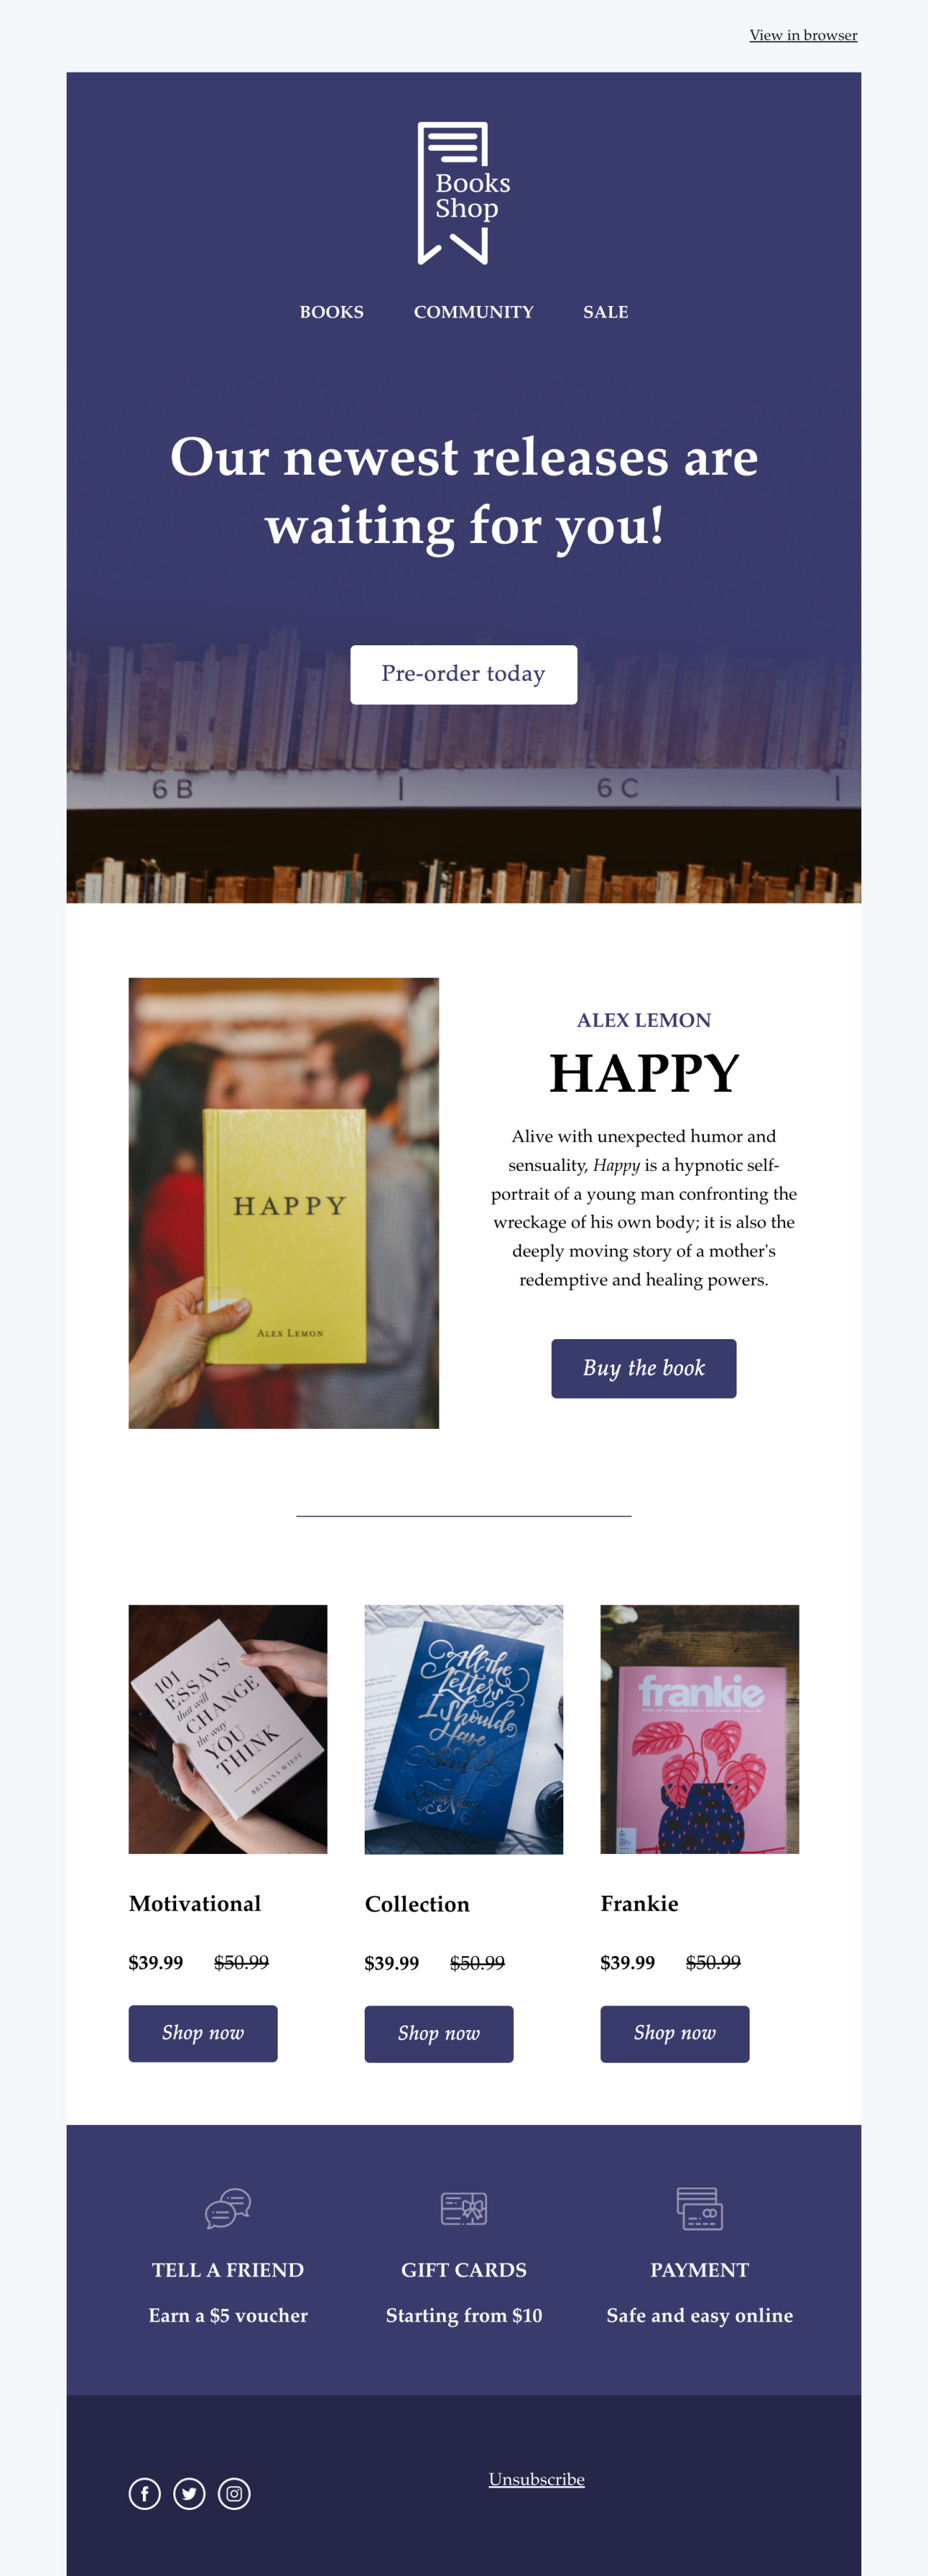 Bookstore promotion template - Made by MailerLite